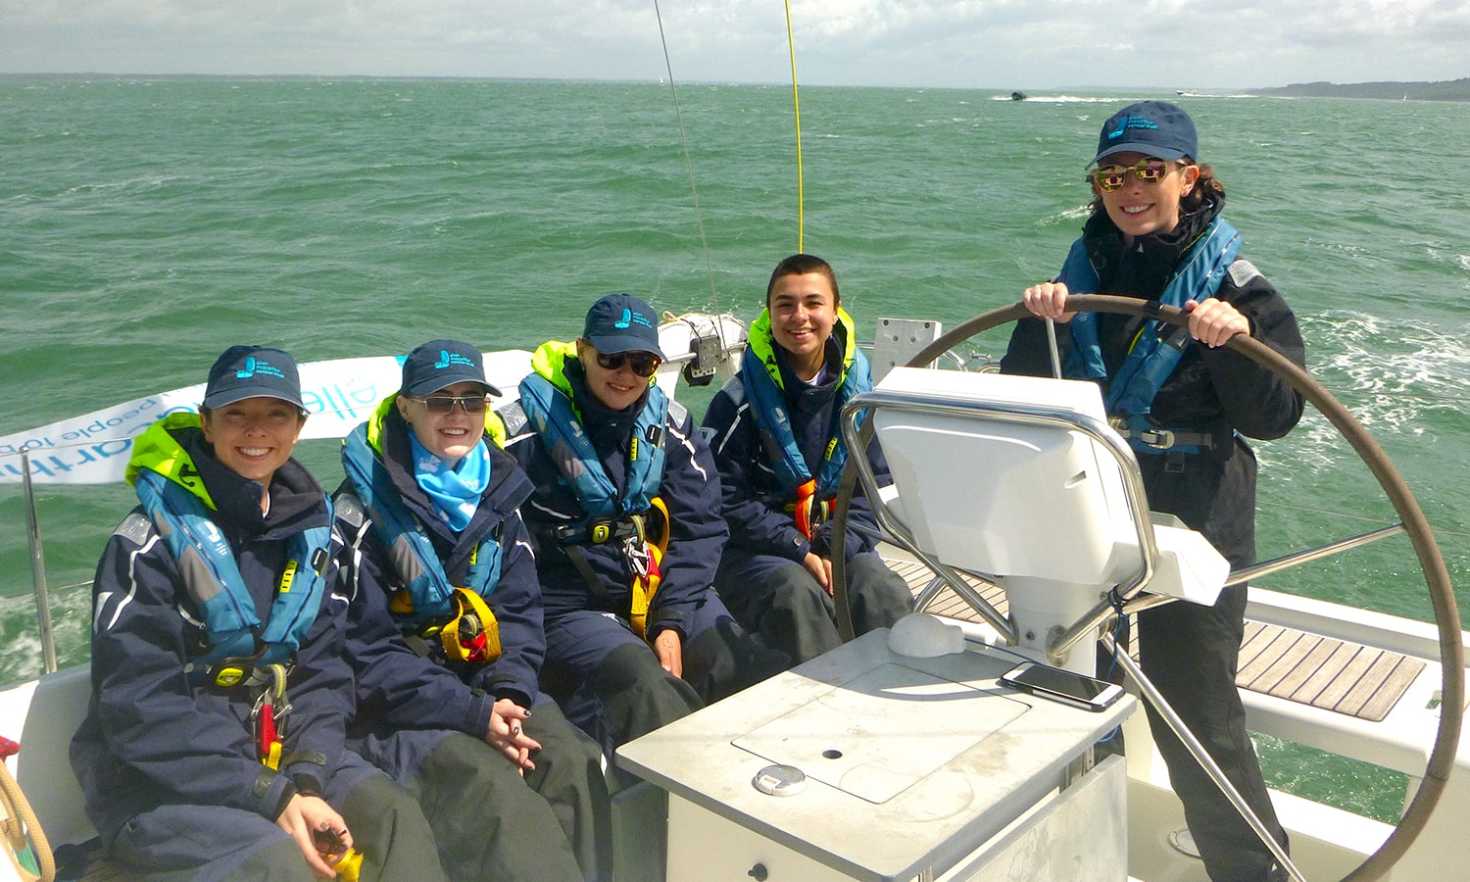 Young people sailing in an Ellen MacArthur Cancer Trust vessel